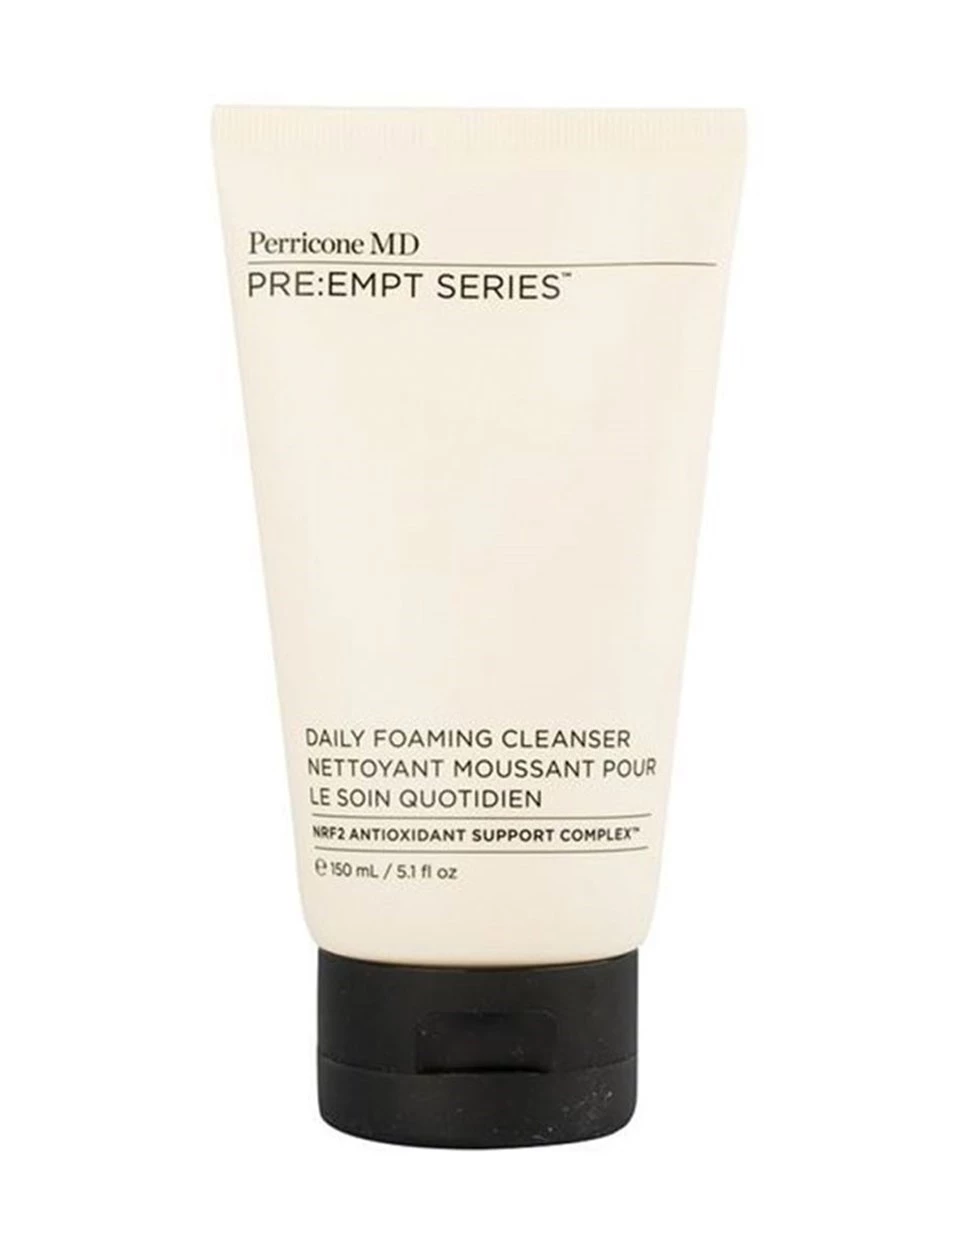 Perricone MD Empt Daily Foaming Cleanser